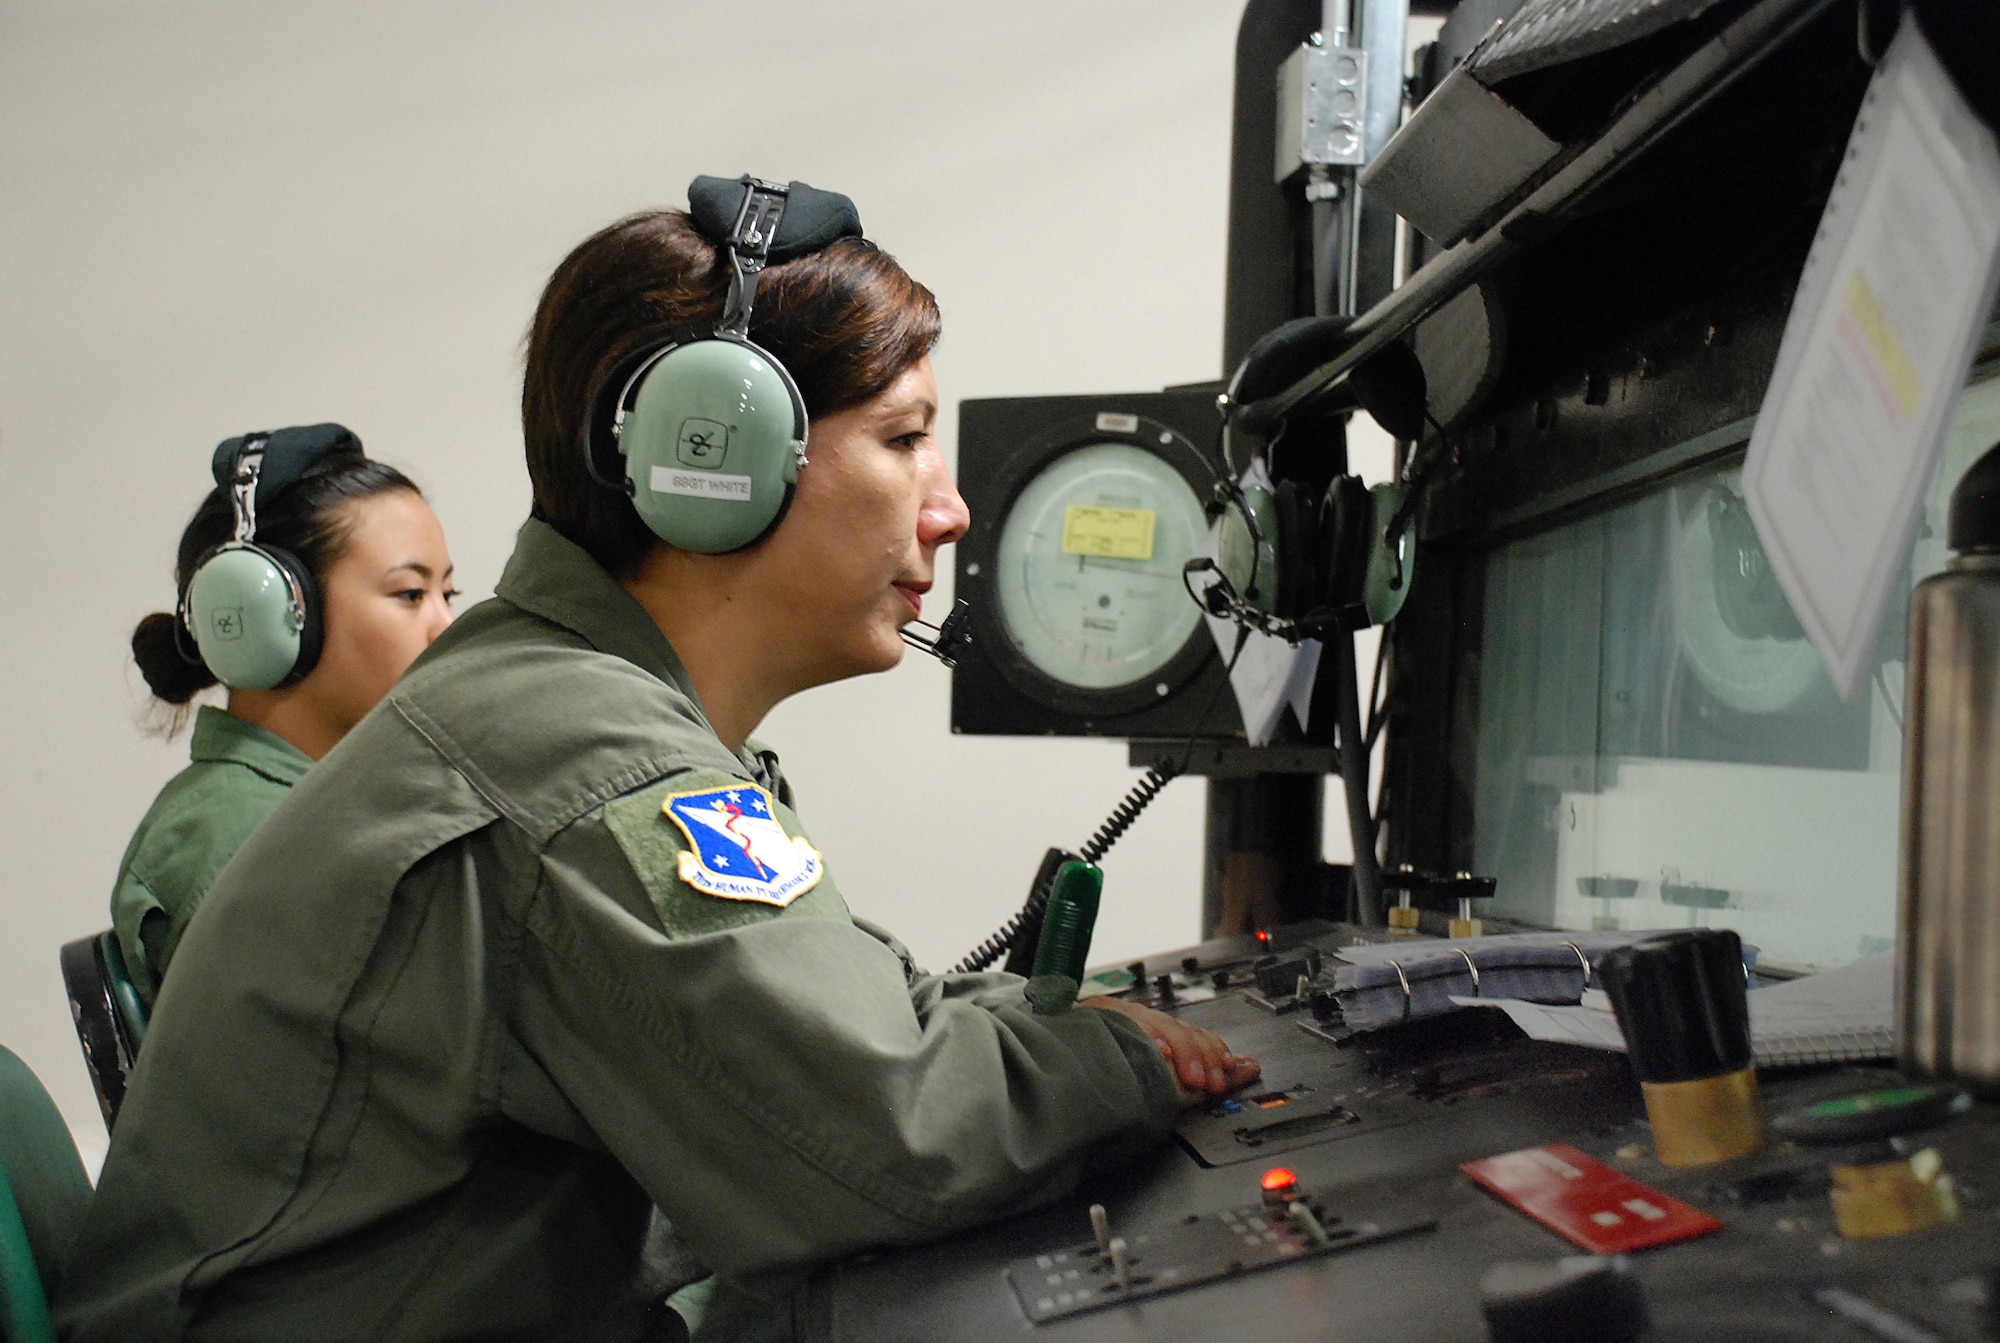 Master Sergeant Michele Armstrong (foreground) guides the United States Air Force School of Aerospace Medicine’s (USAFSAM’s) altitude chamber flight at Wright-Patterson Air Force Base (WPAFB), Ohio. Airman Kristyn Gonzales (background) operates the altitude chamber. (U.S. Air Force photo by Chris Gulliford)